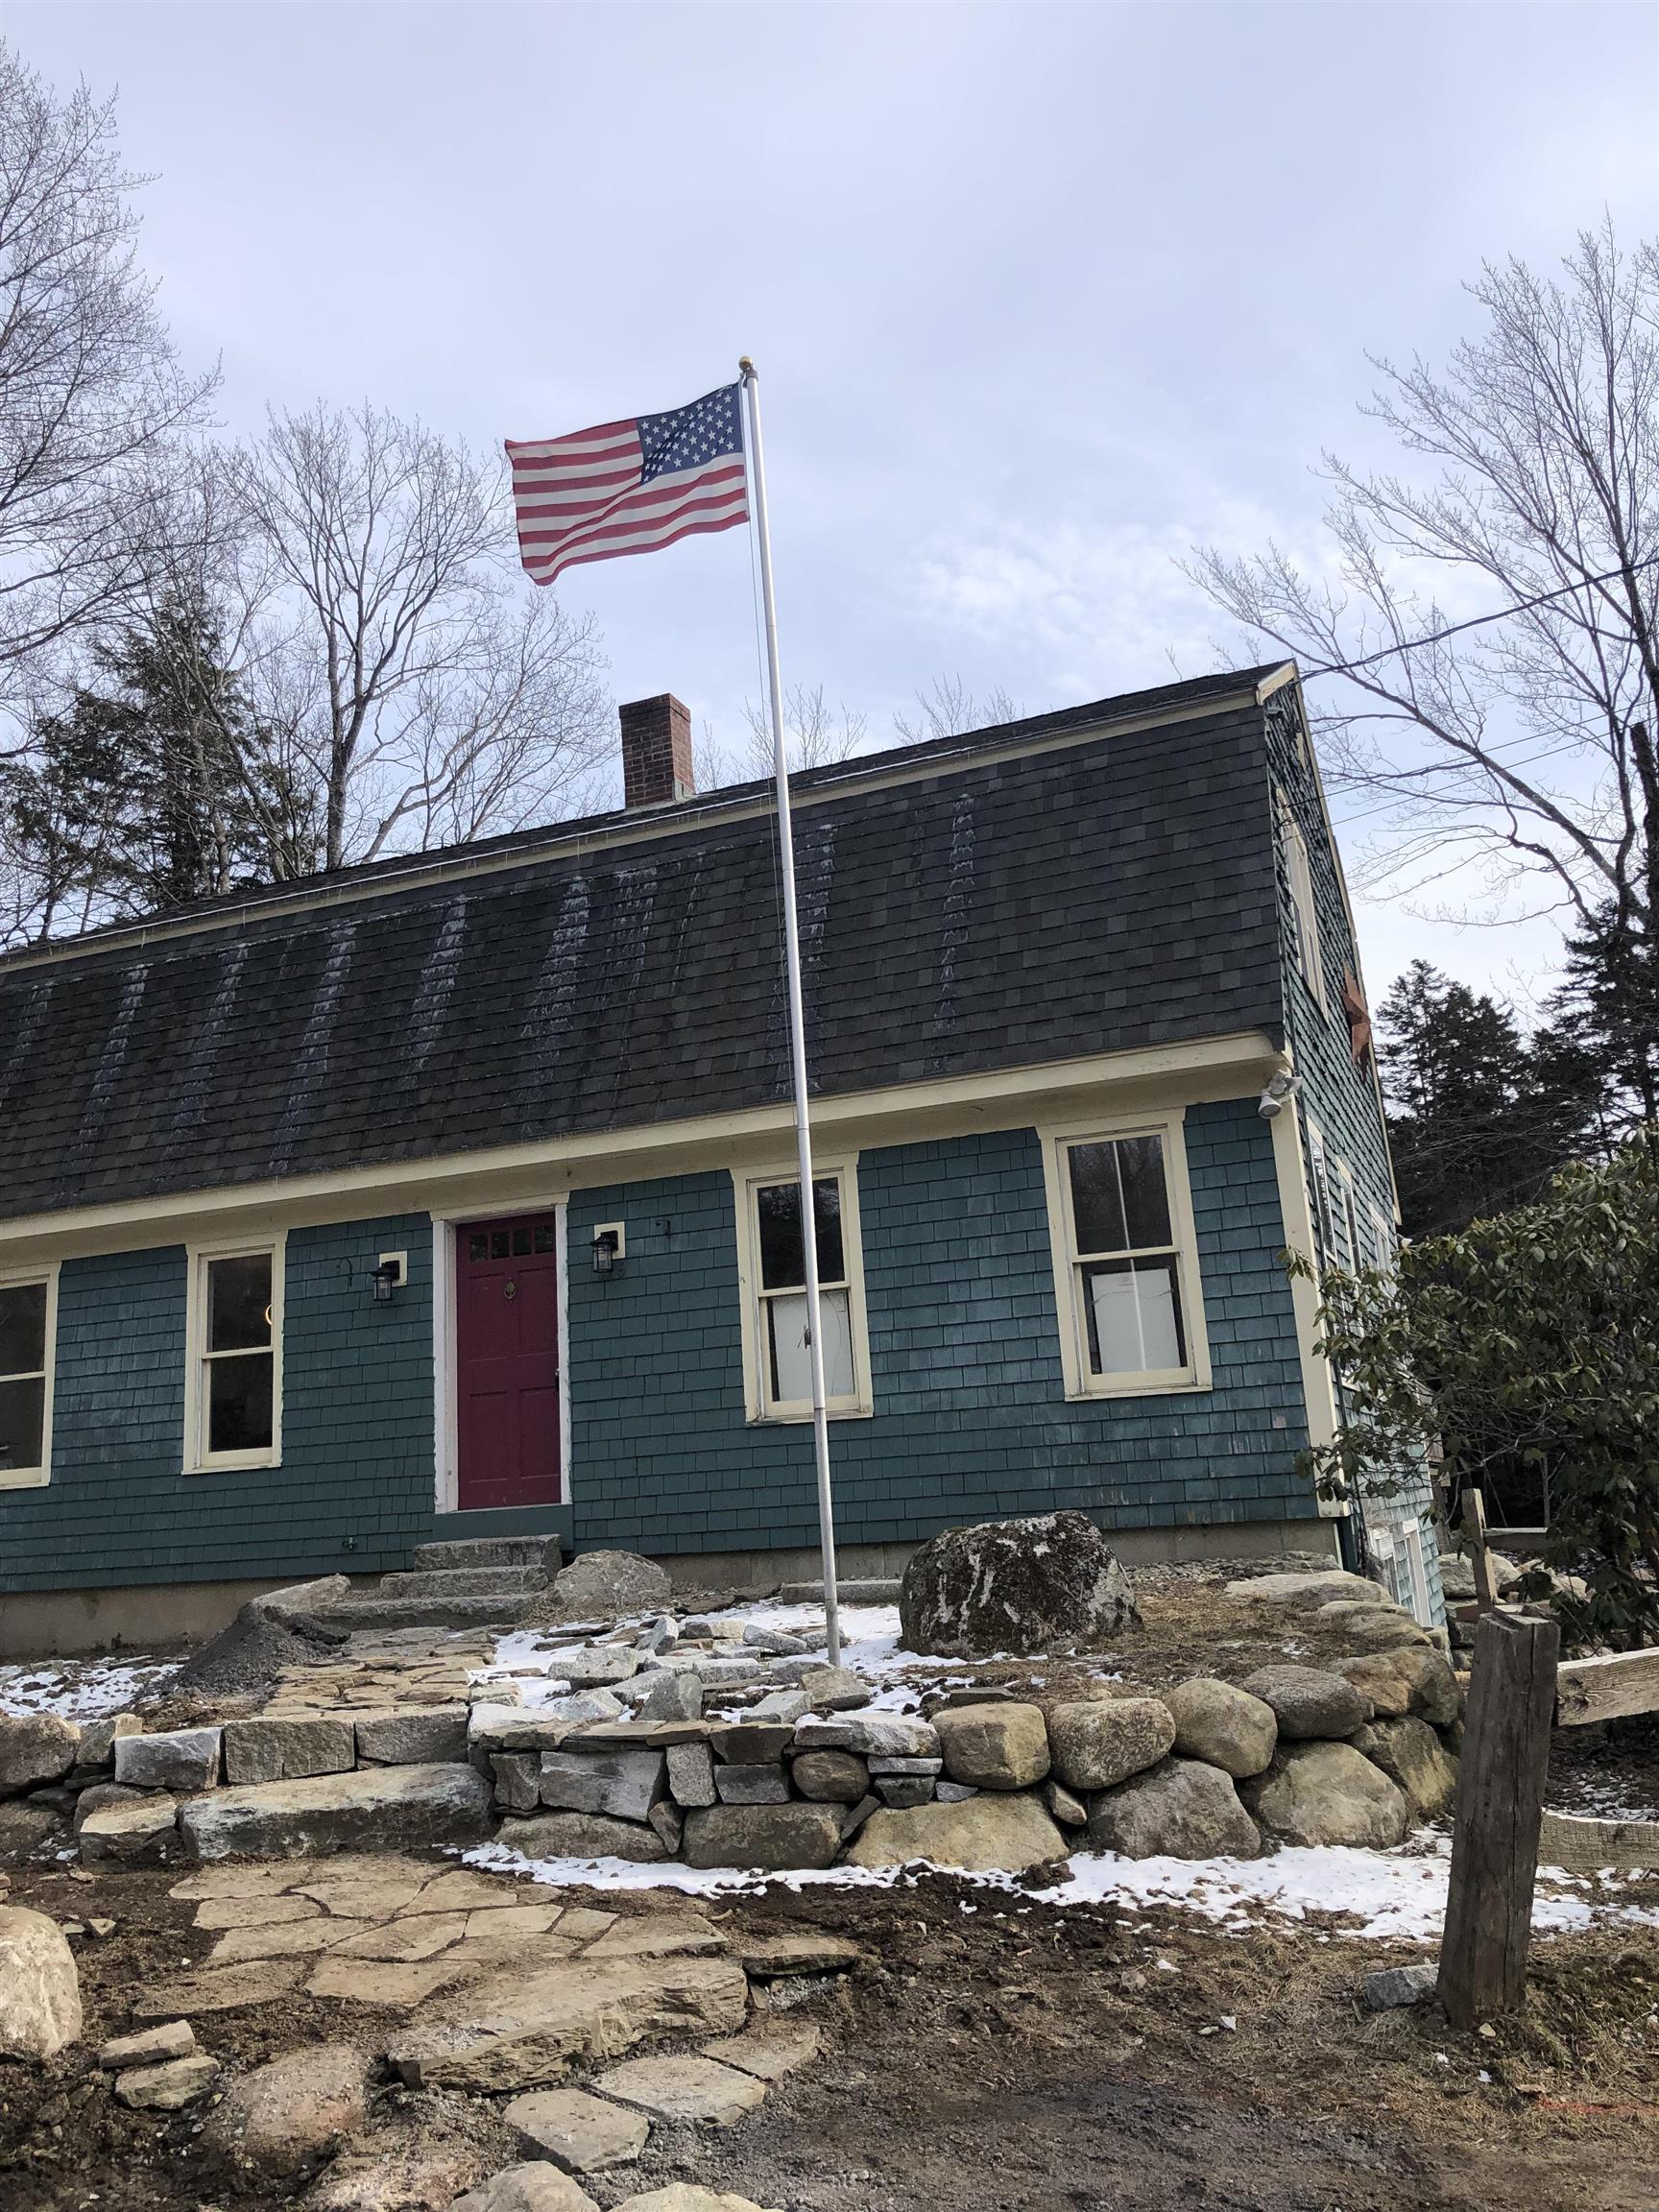 NEW LONDON NH Homes for sale